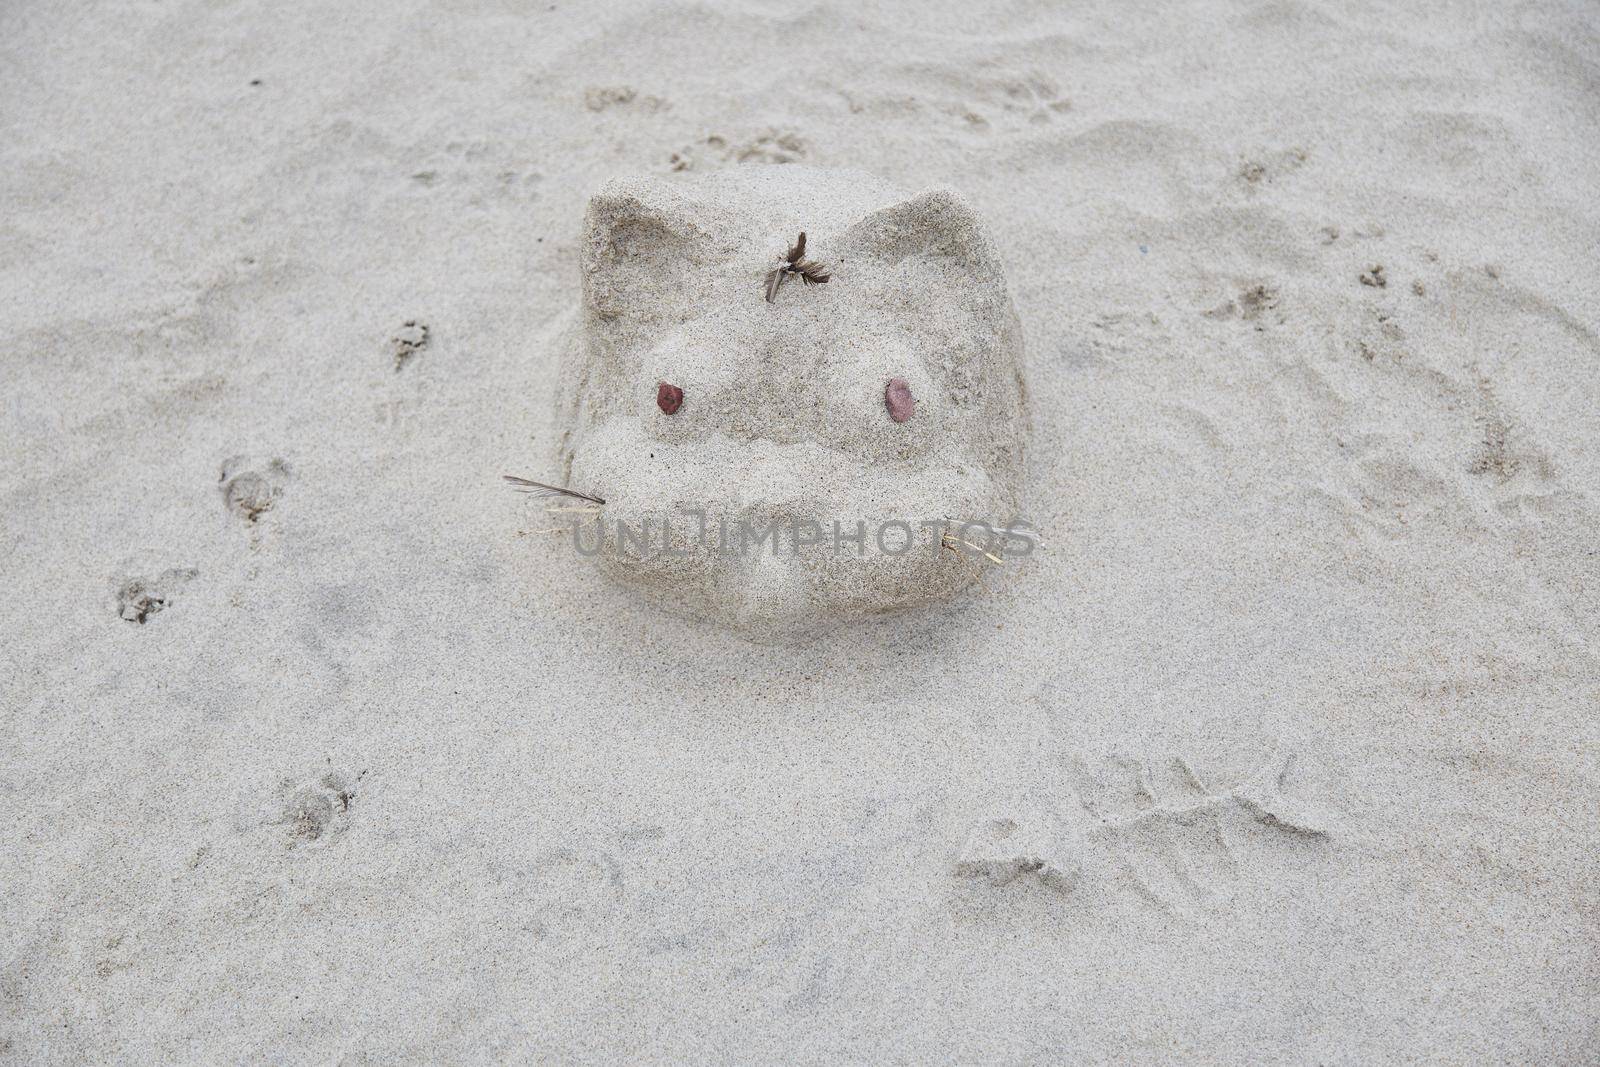 Sand sculpture of a cat on the beach.